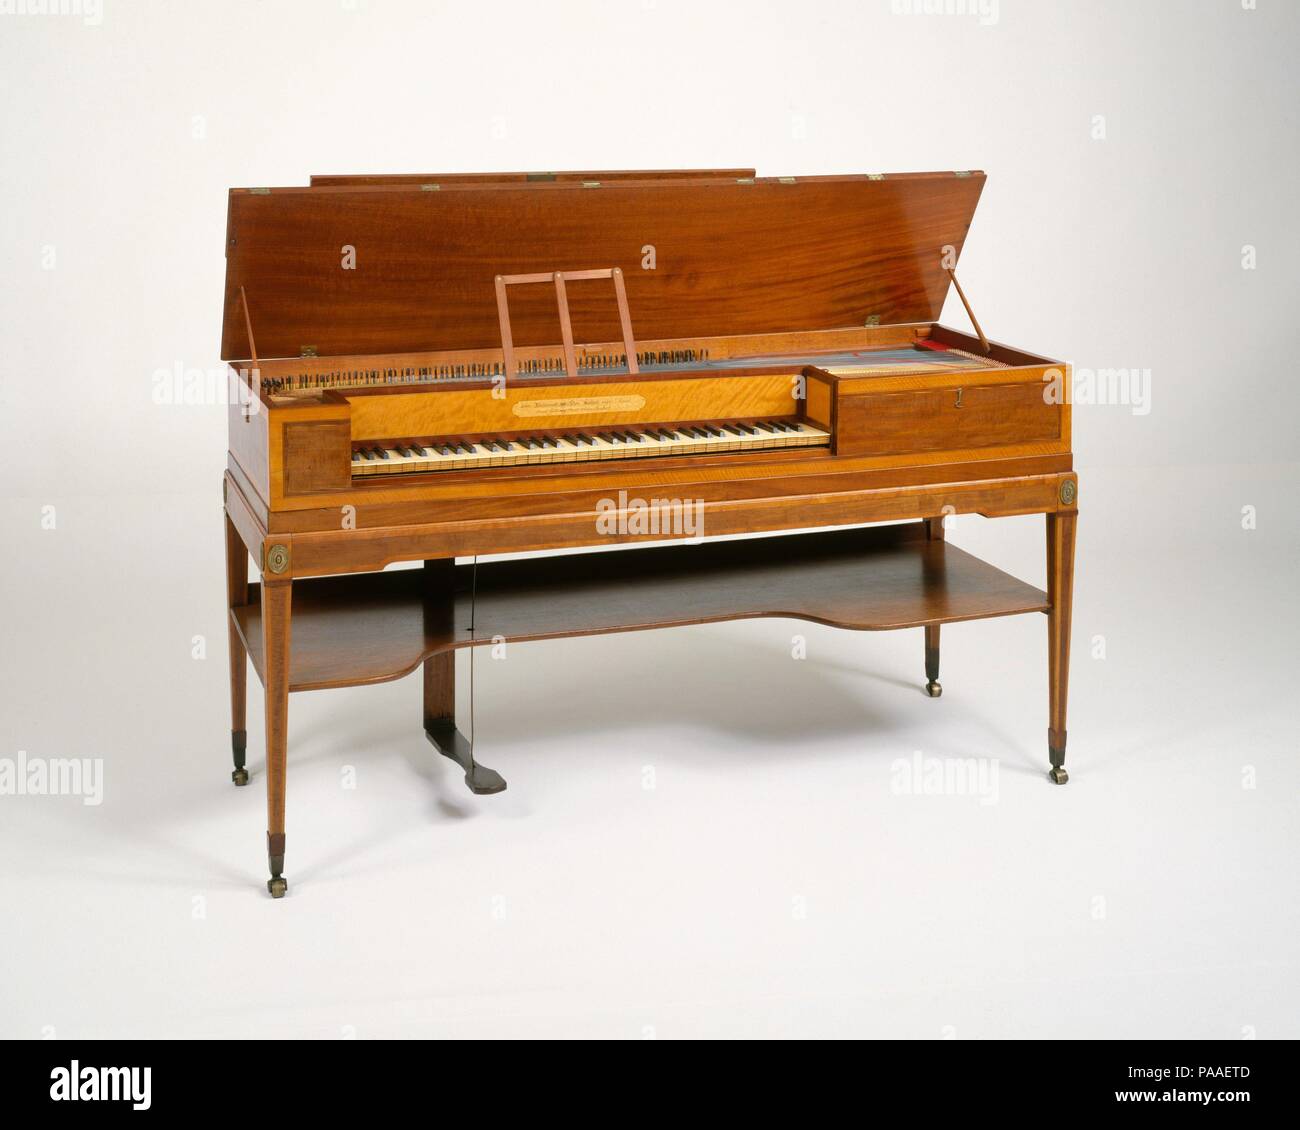 Square Piano. Culture: British. Dimensions: Case length (perpendicular to  keyboard): 57.3 cm (22 5/8 in.) Width (parallel to keyboard): 162.9 cm (64  1/8 in.) Depth (without lid): 22.0 cm (8 3/4 in.)